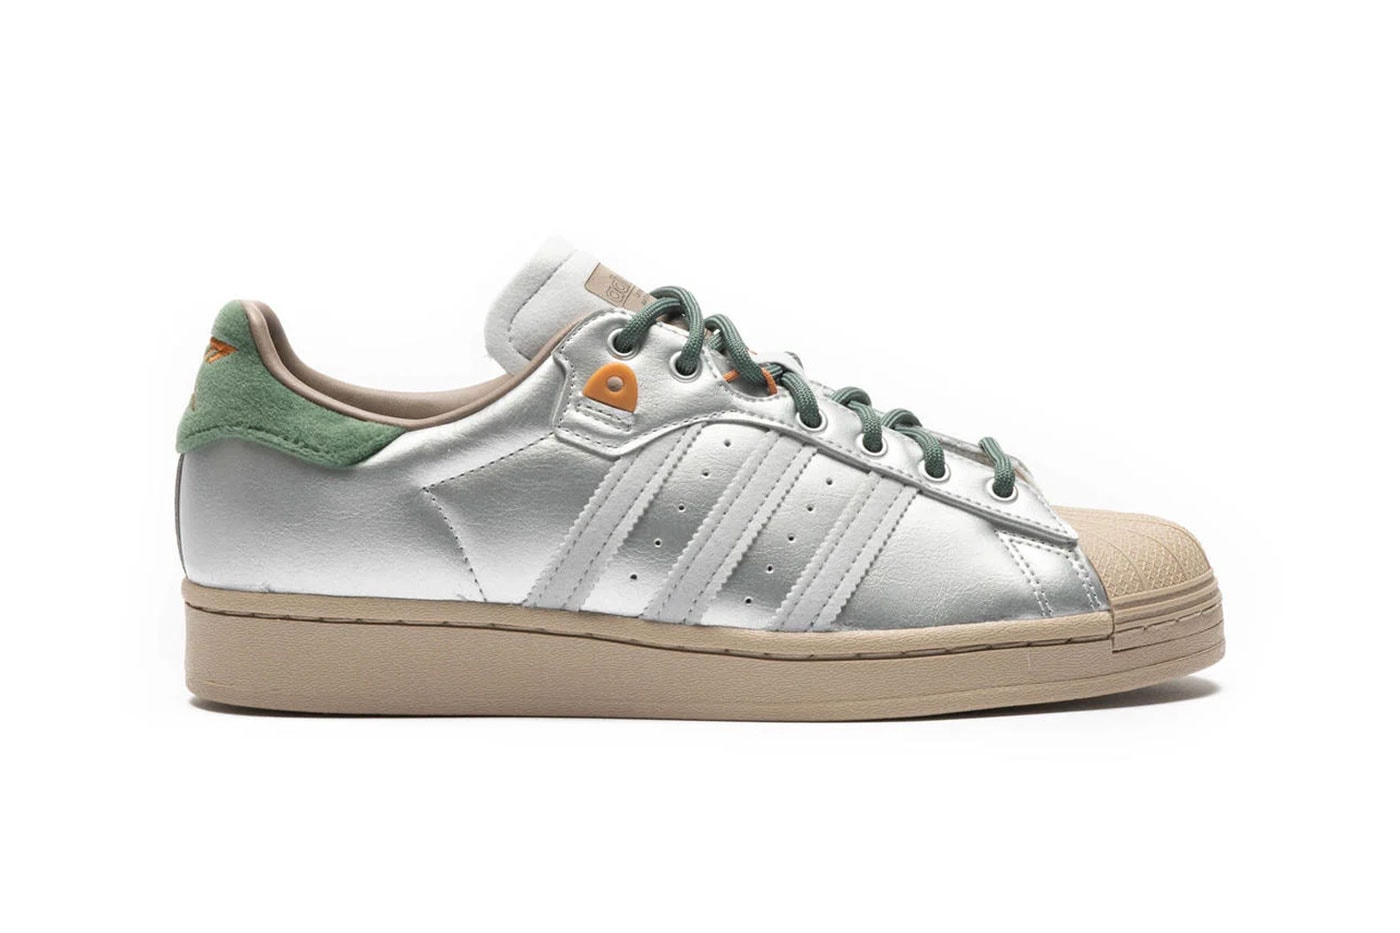 adidas Originals Superstar yanwai hp2361 msilve greoxi teccop silver green leather synthetic tan orange release info